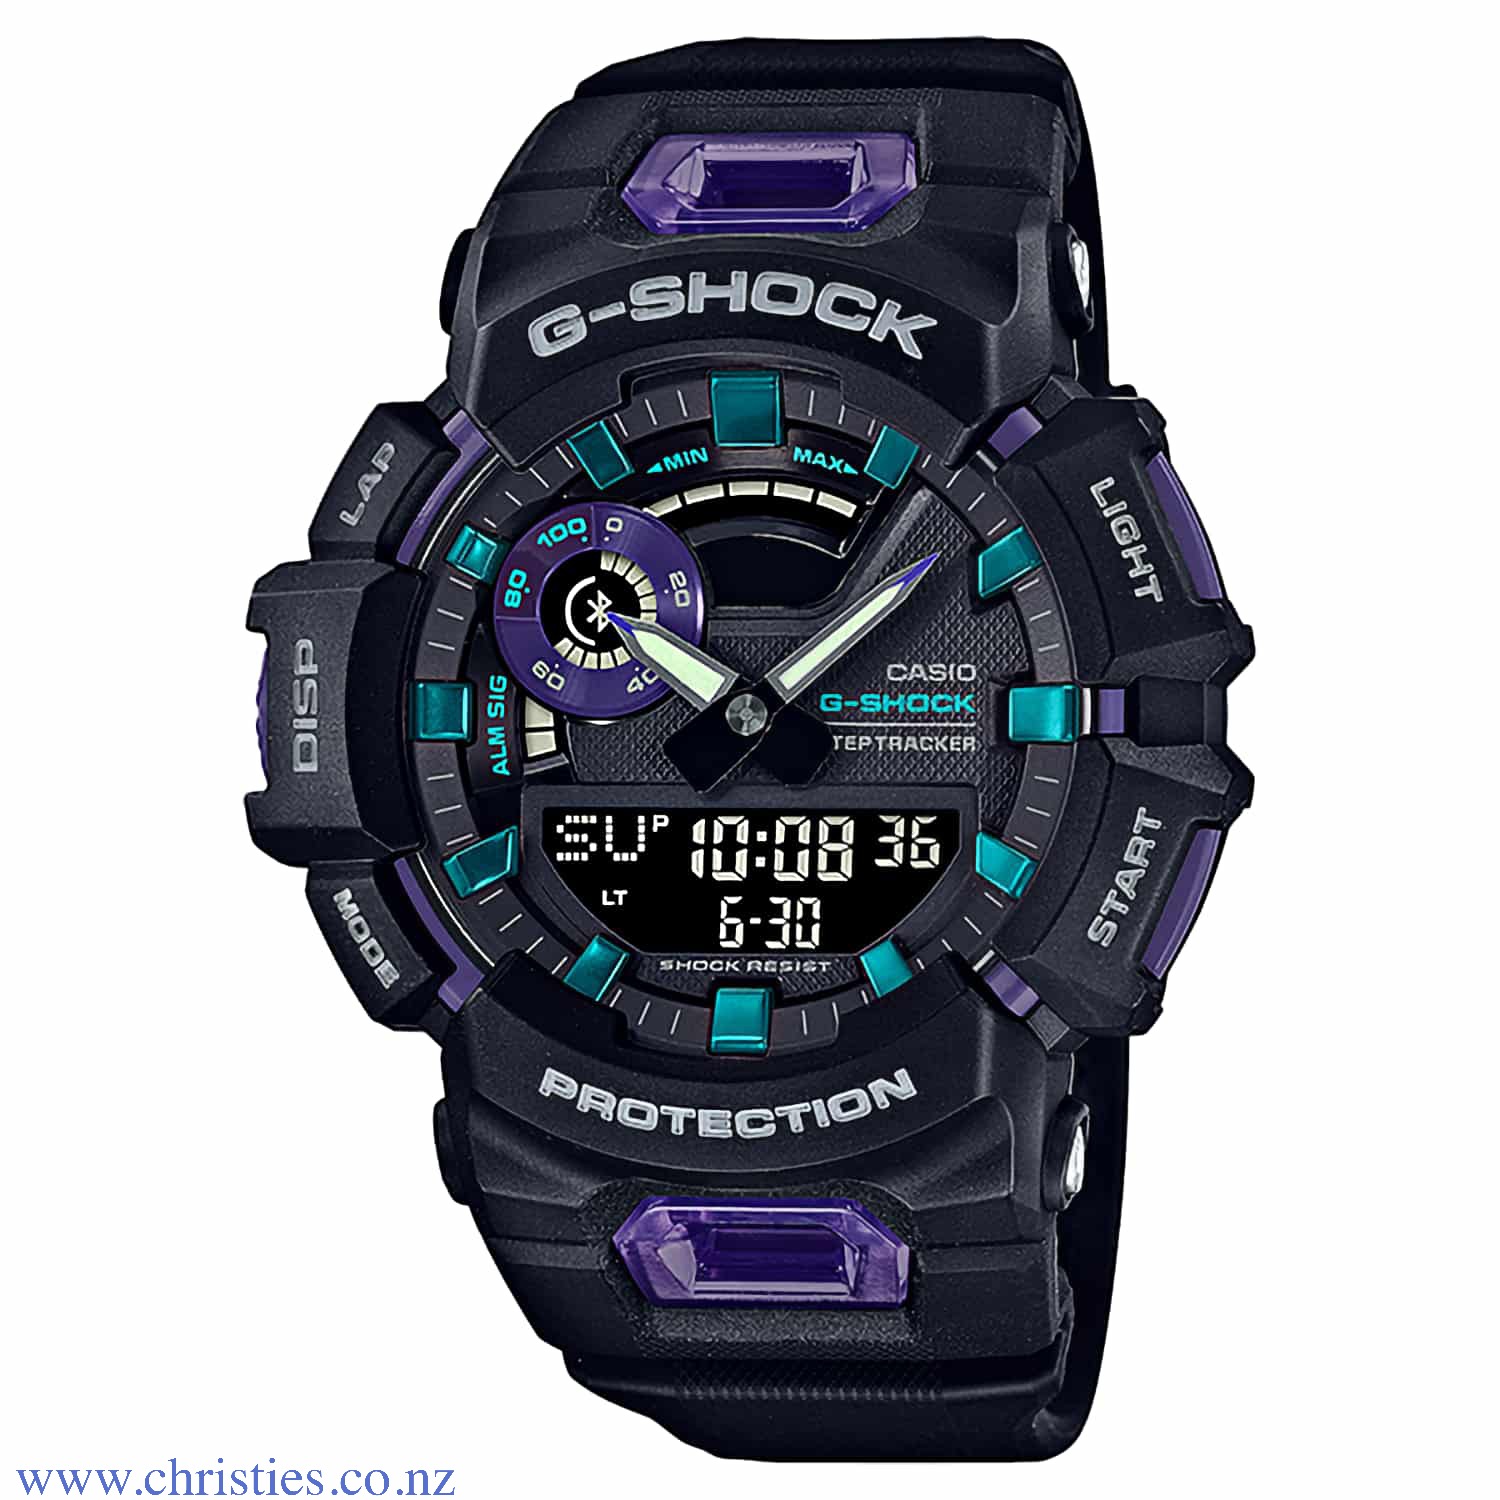 GBA900-1A6 G-SHOCK G-Squad Sports Watch. Introducing the latest G-SQUAD additions to the GBA-900 Series of Smartphone Link timepieces. This model can measure distance using an accelerometer while linked with the GPS function of a smartphone via Bluetooth®